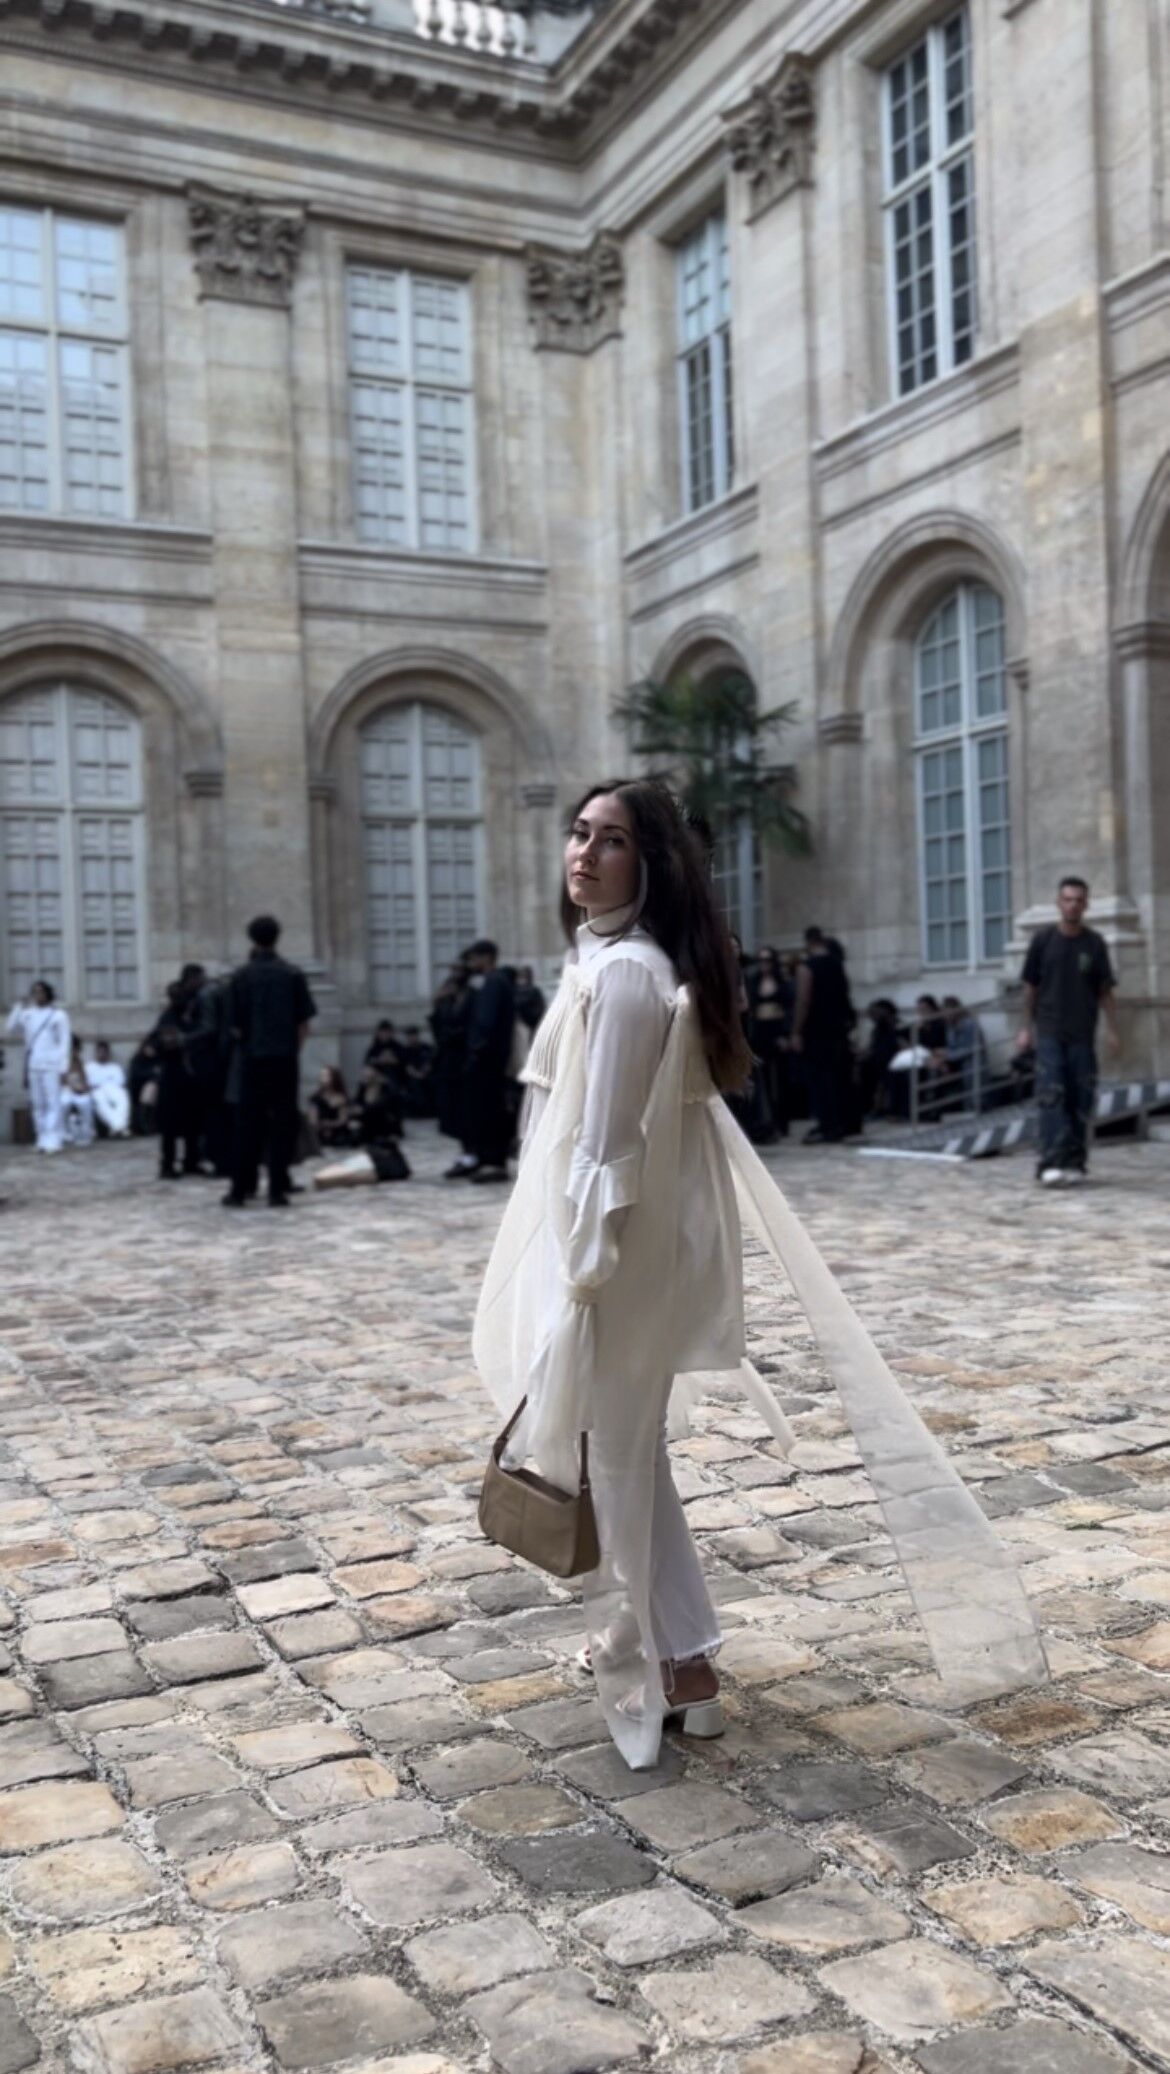 A woman in a white outfit posing at a fashion event, with classical architecture in the background.